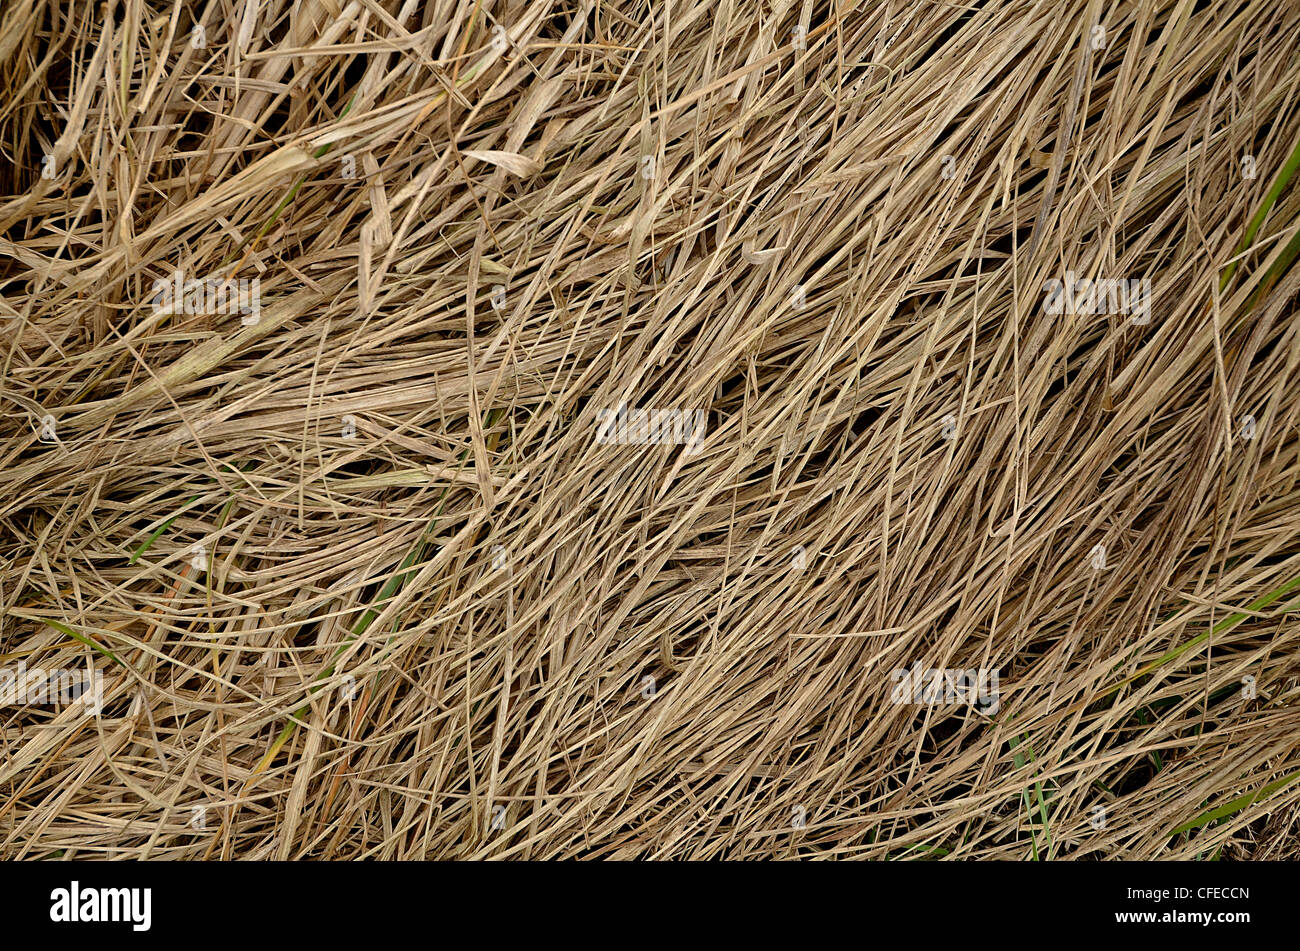 Detail of dead, long, grass during winter months. Metaphor 'kicked into the long grass'. Long grass concept. Stock Photo